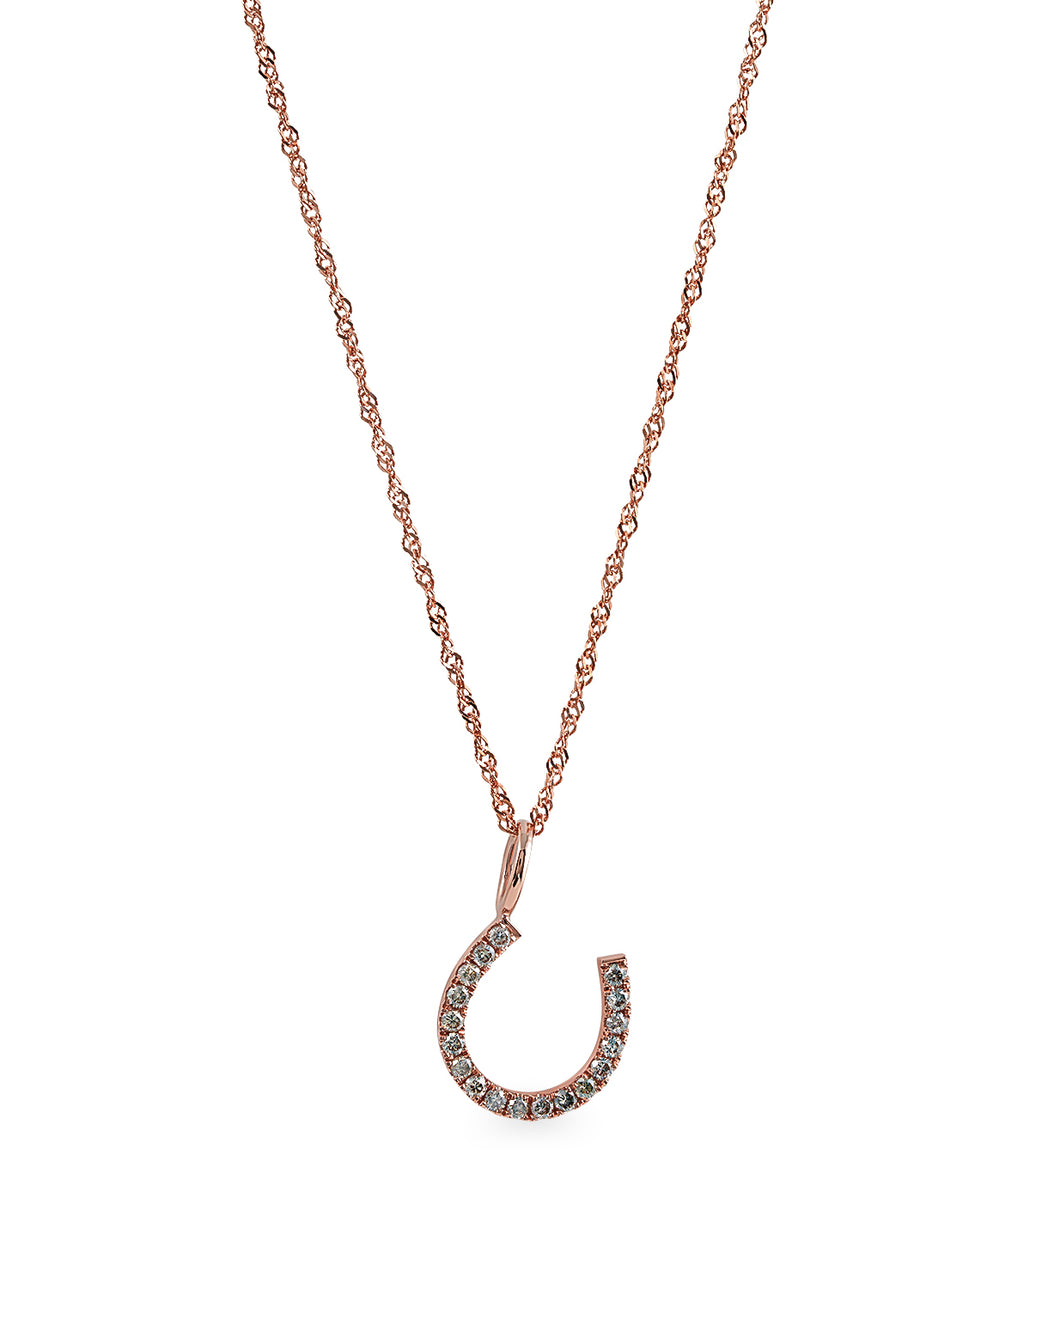 Horse shoe necklace - Rose Gold& Brown diamonds